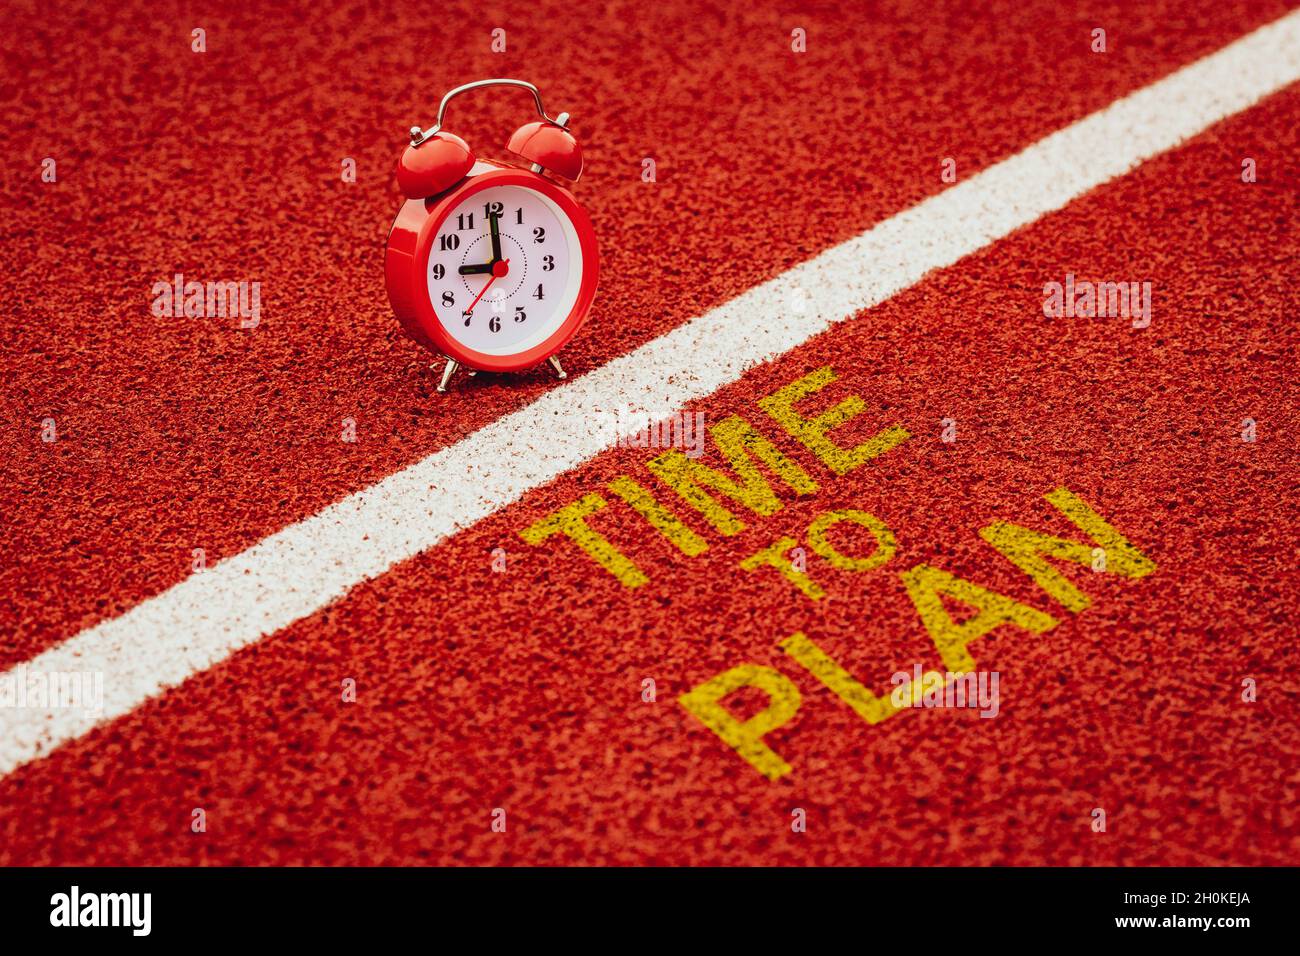 Alarm clock and 'Time to plan' is written on a run track Stock Photo